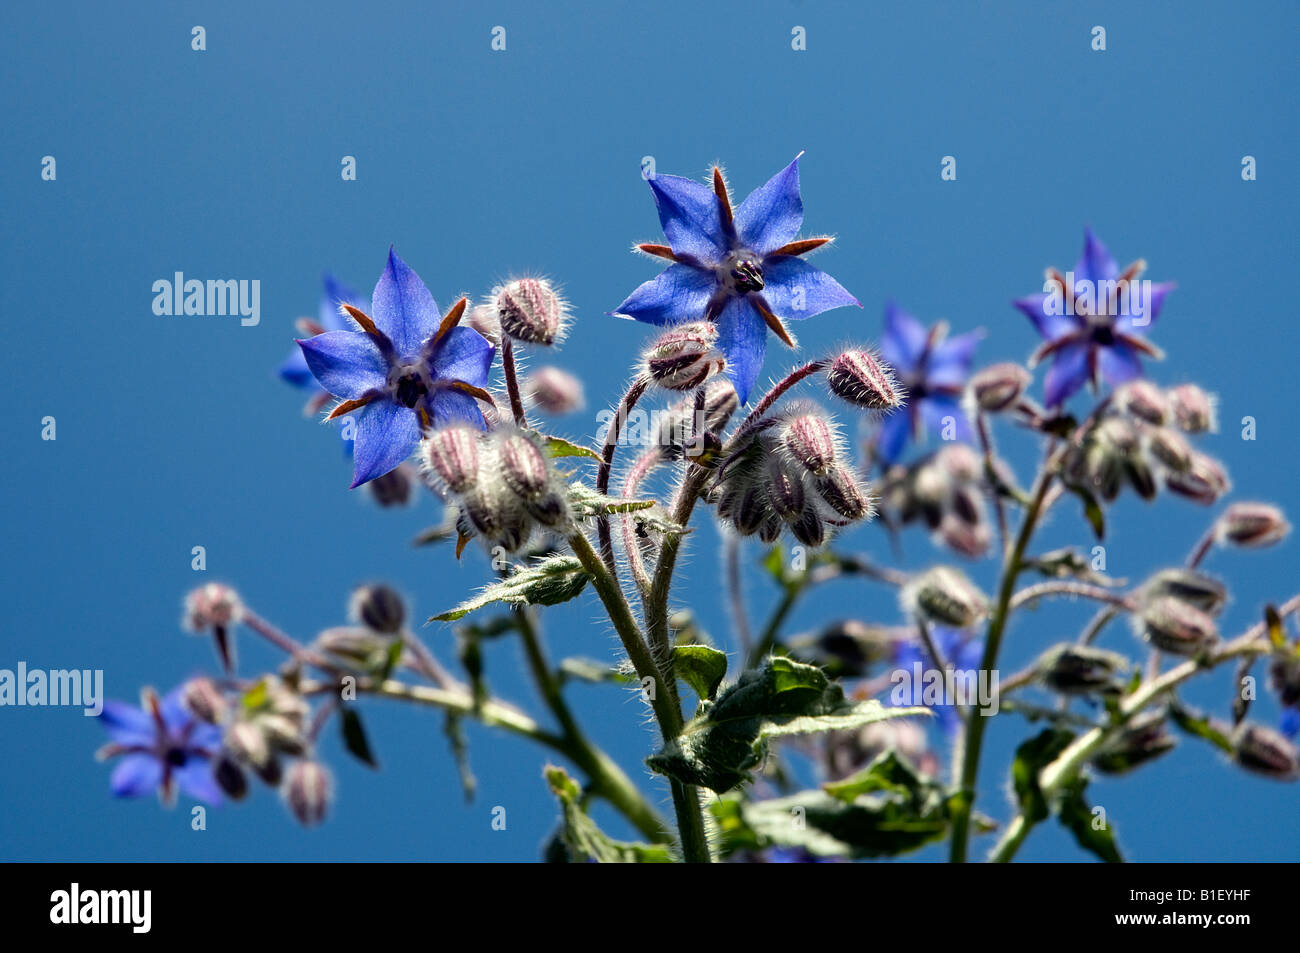 Worms eye view of Borage plant with buds and flowers Stock Photo